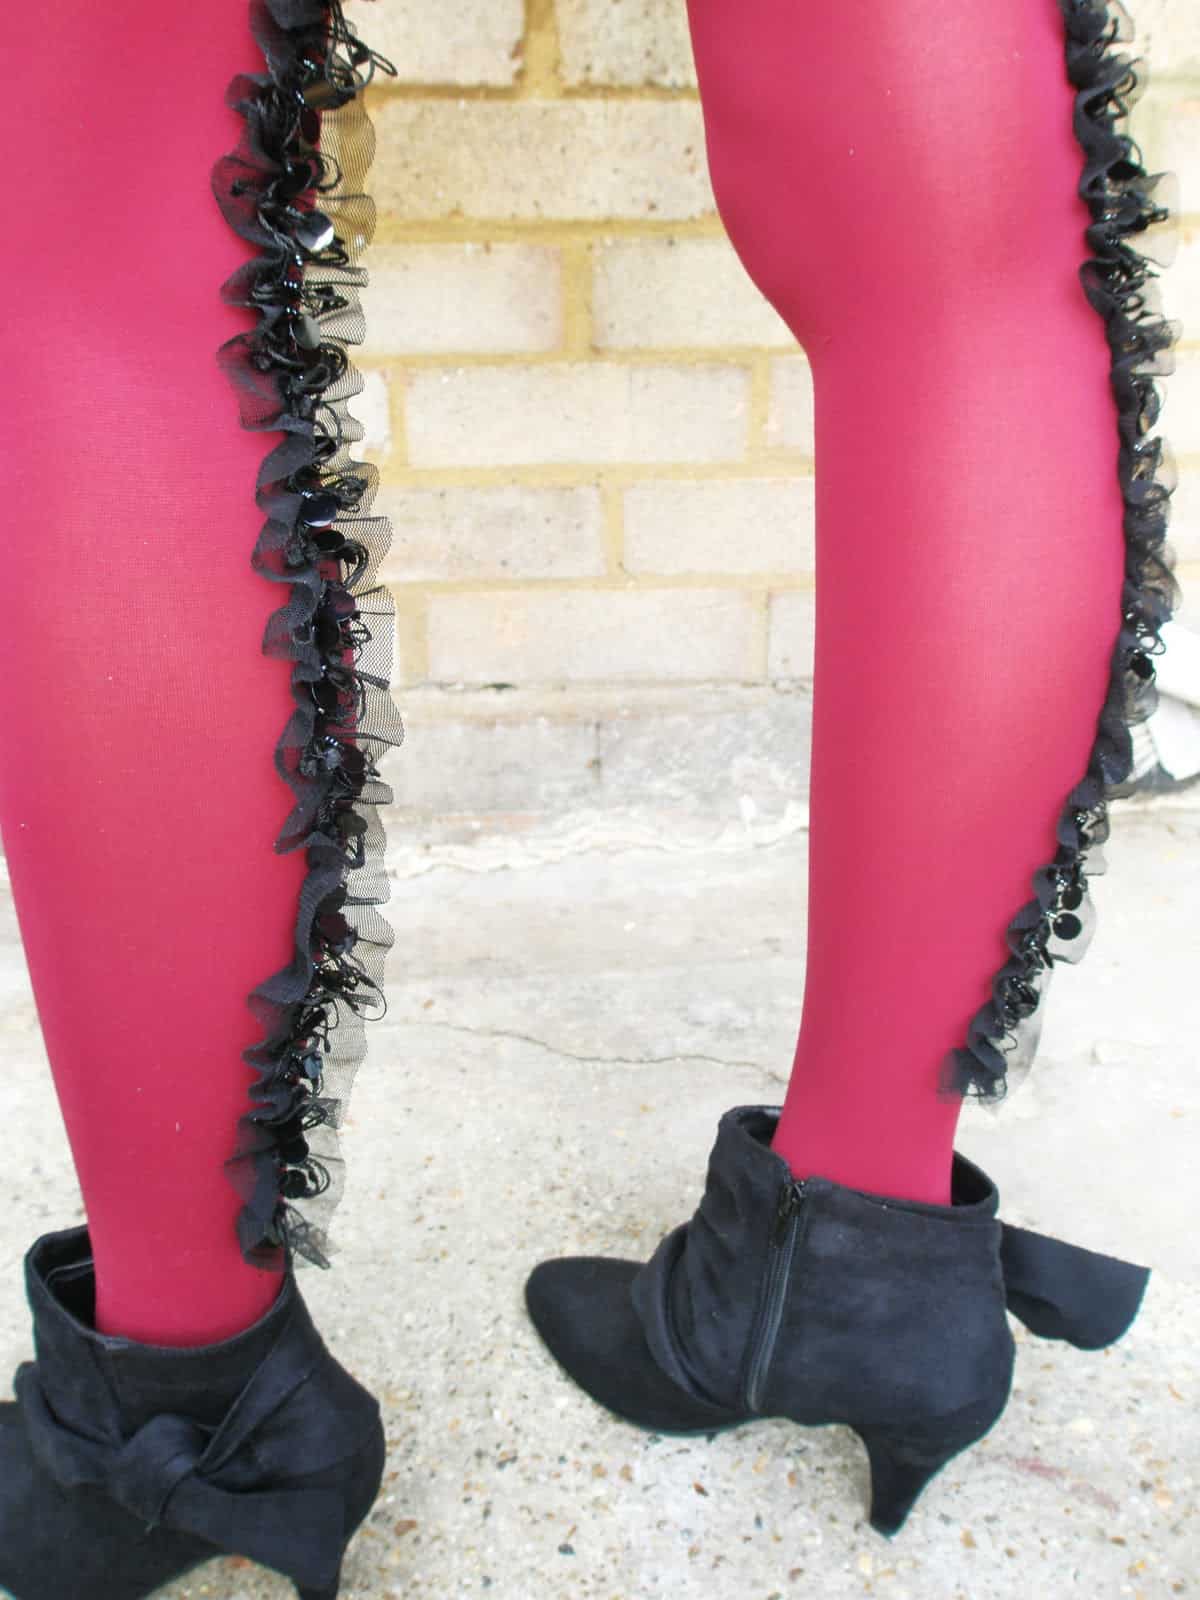 Lace ruffle backed tights